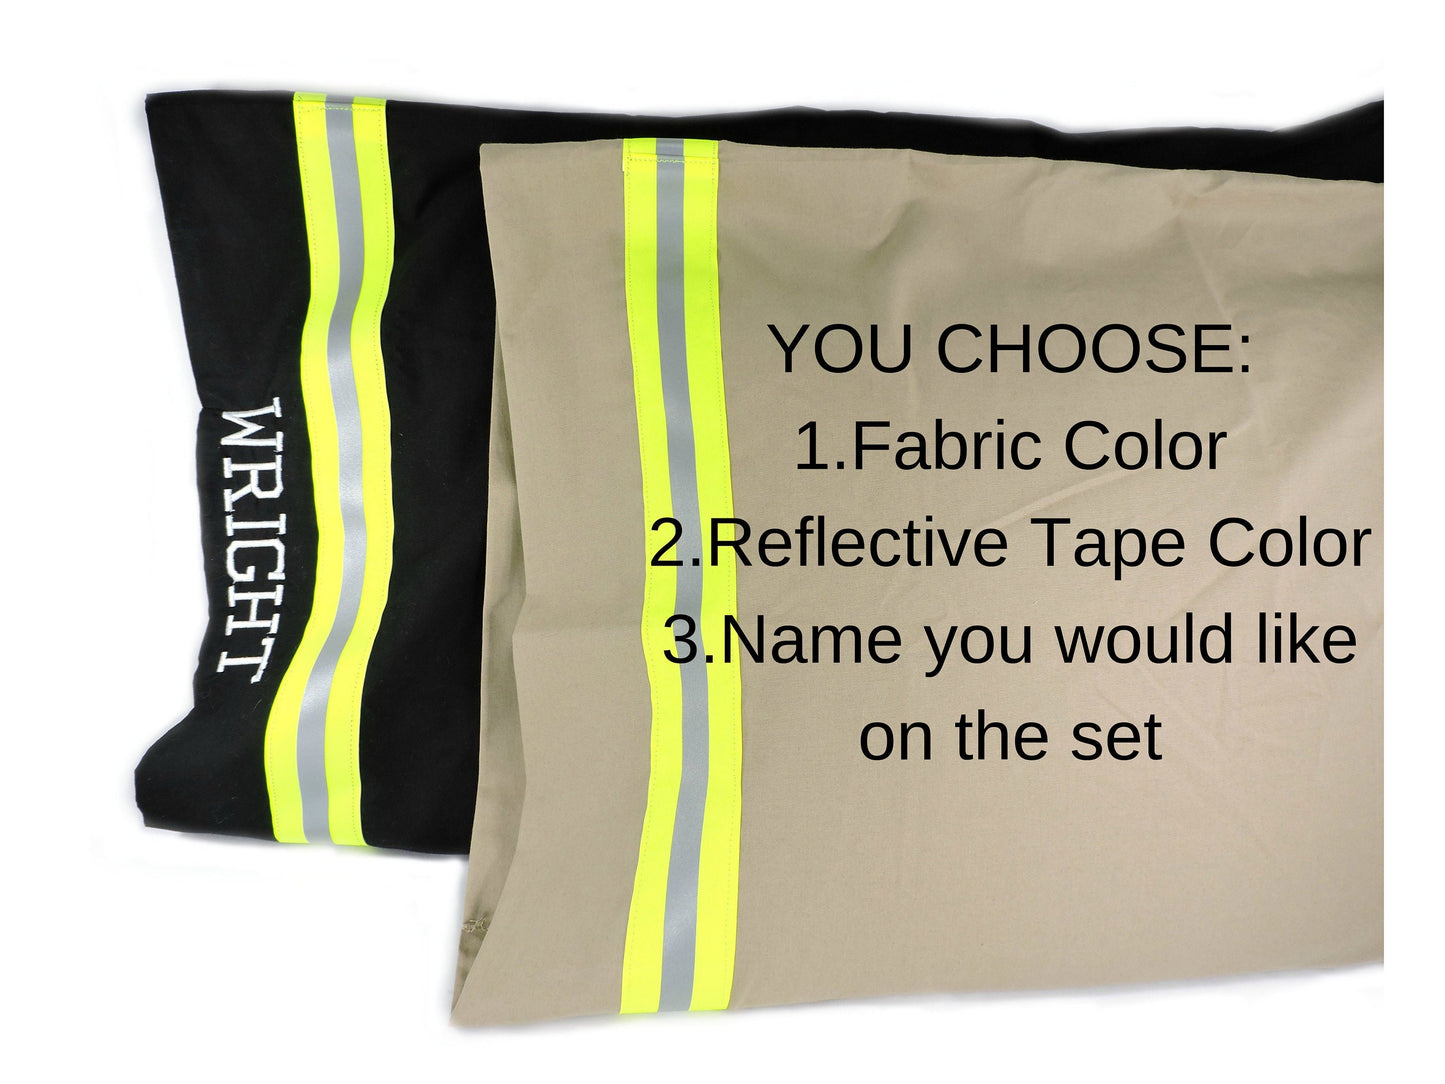 firefighter pillowcase with directions on how to order